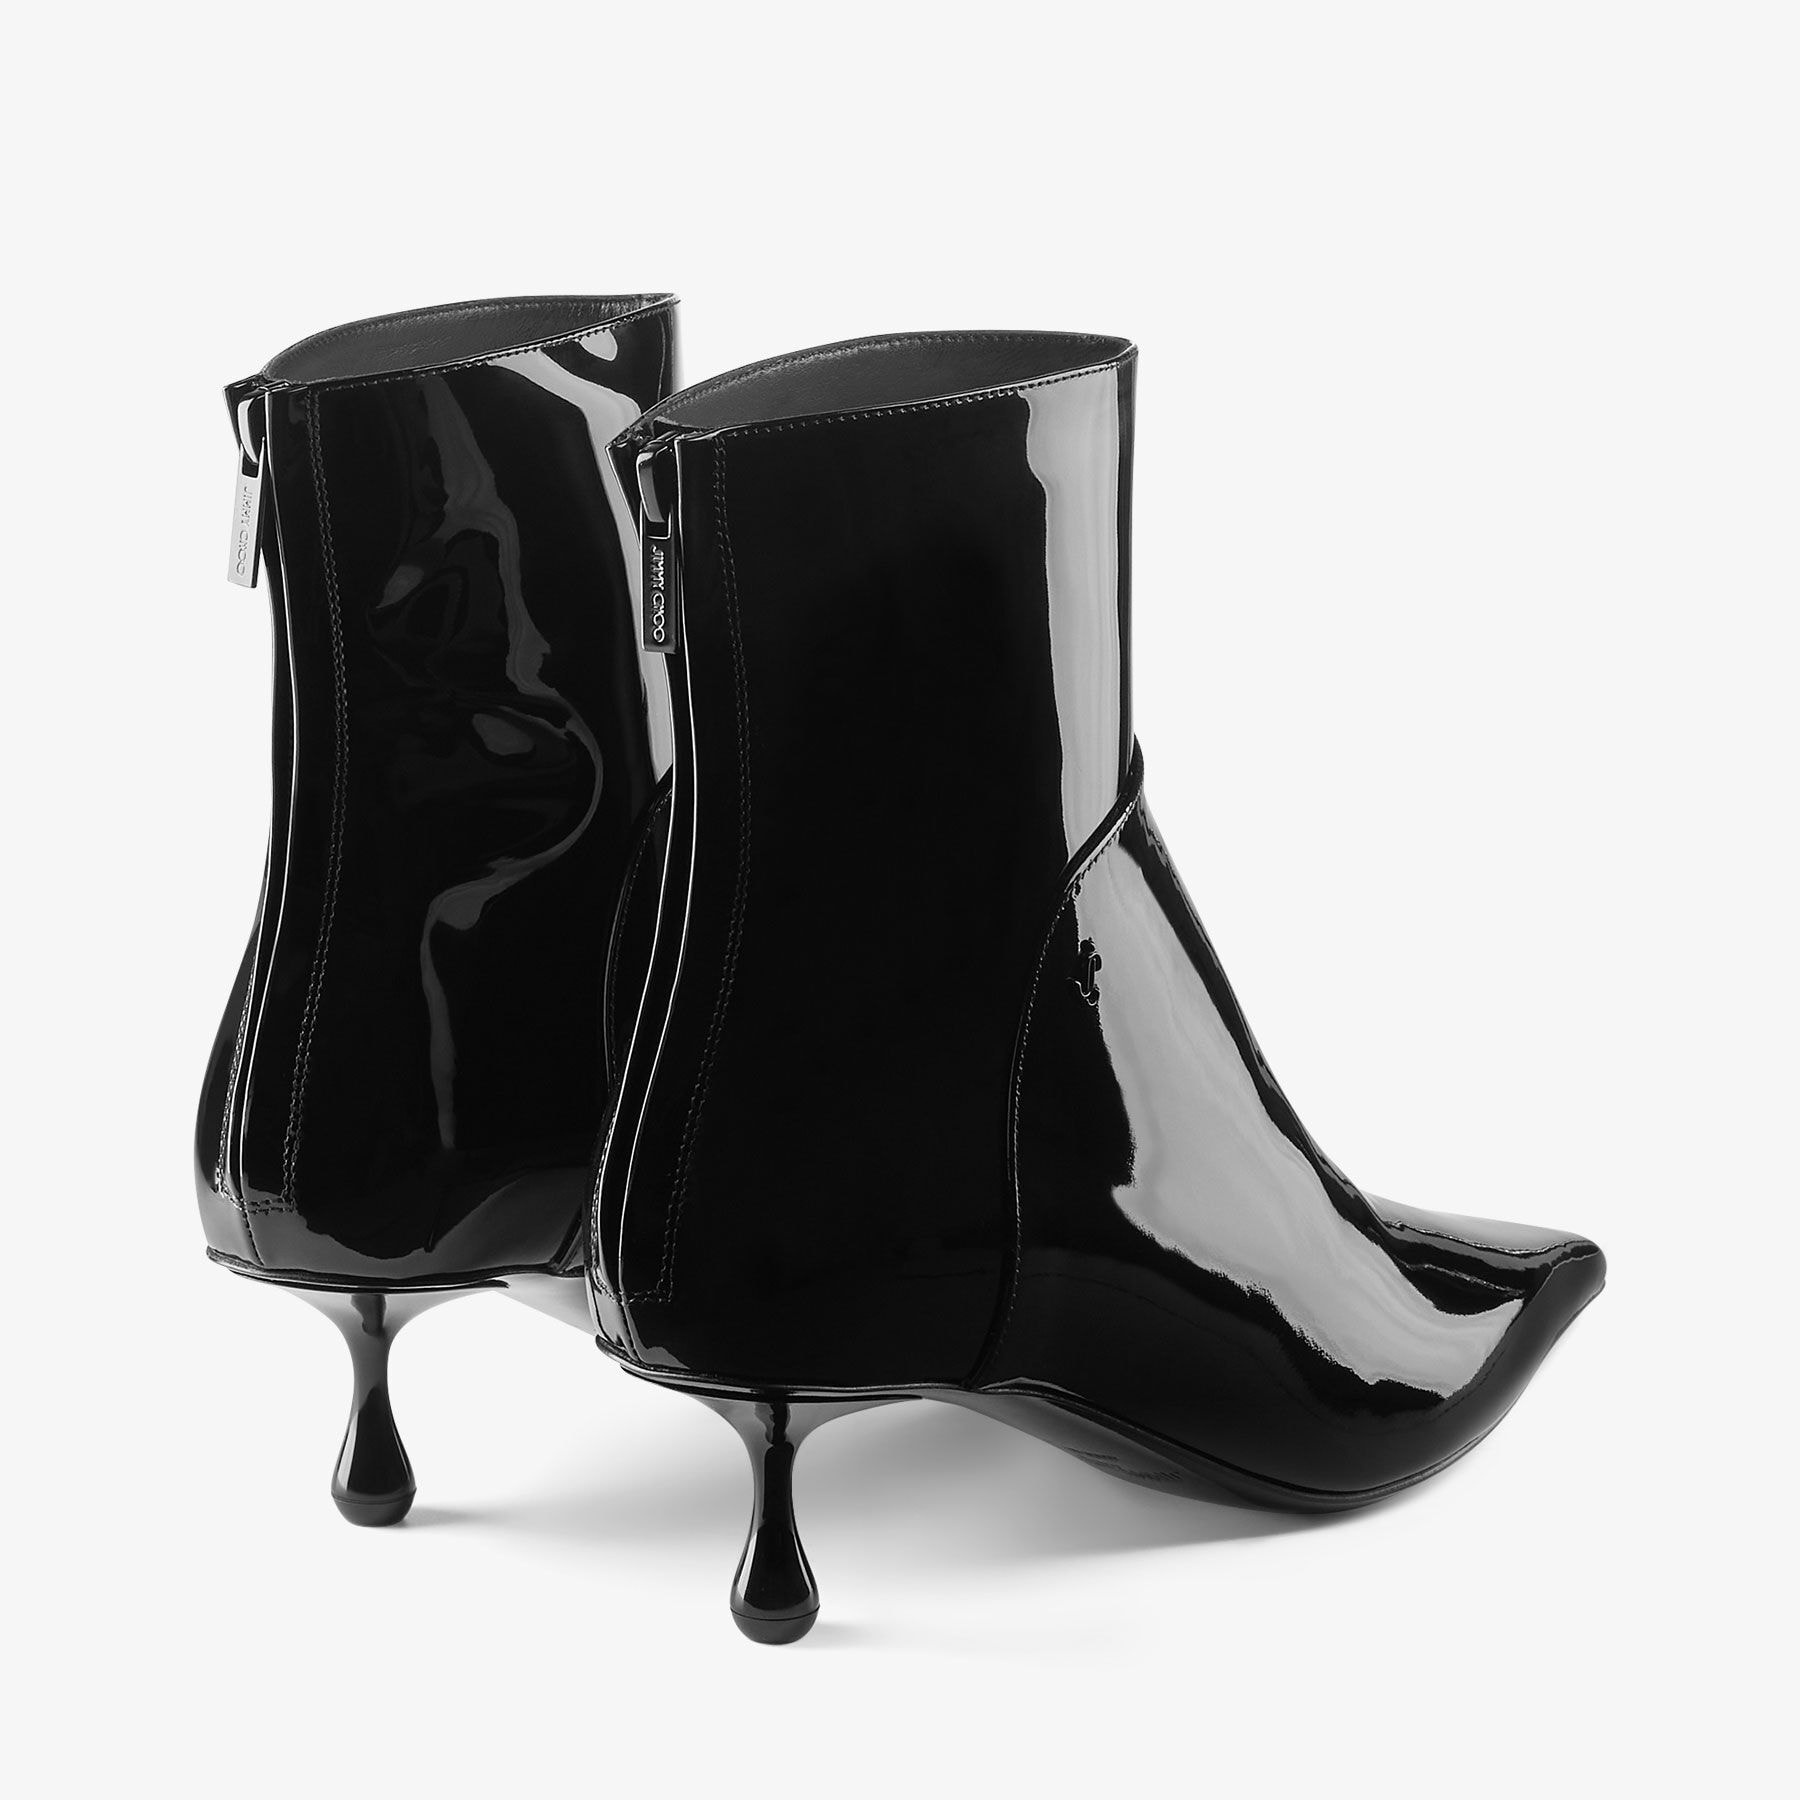 Cycas Ankle Boot 50
Black Patent Leather Ankle Boots - 6